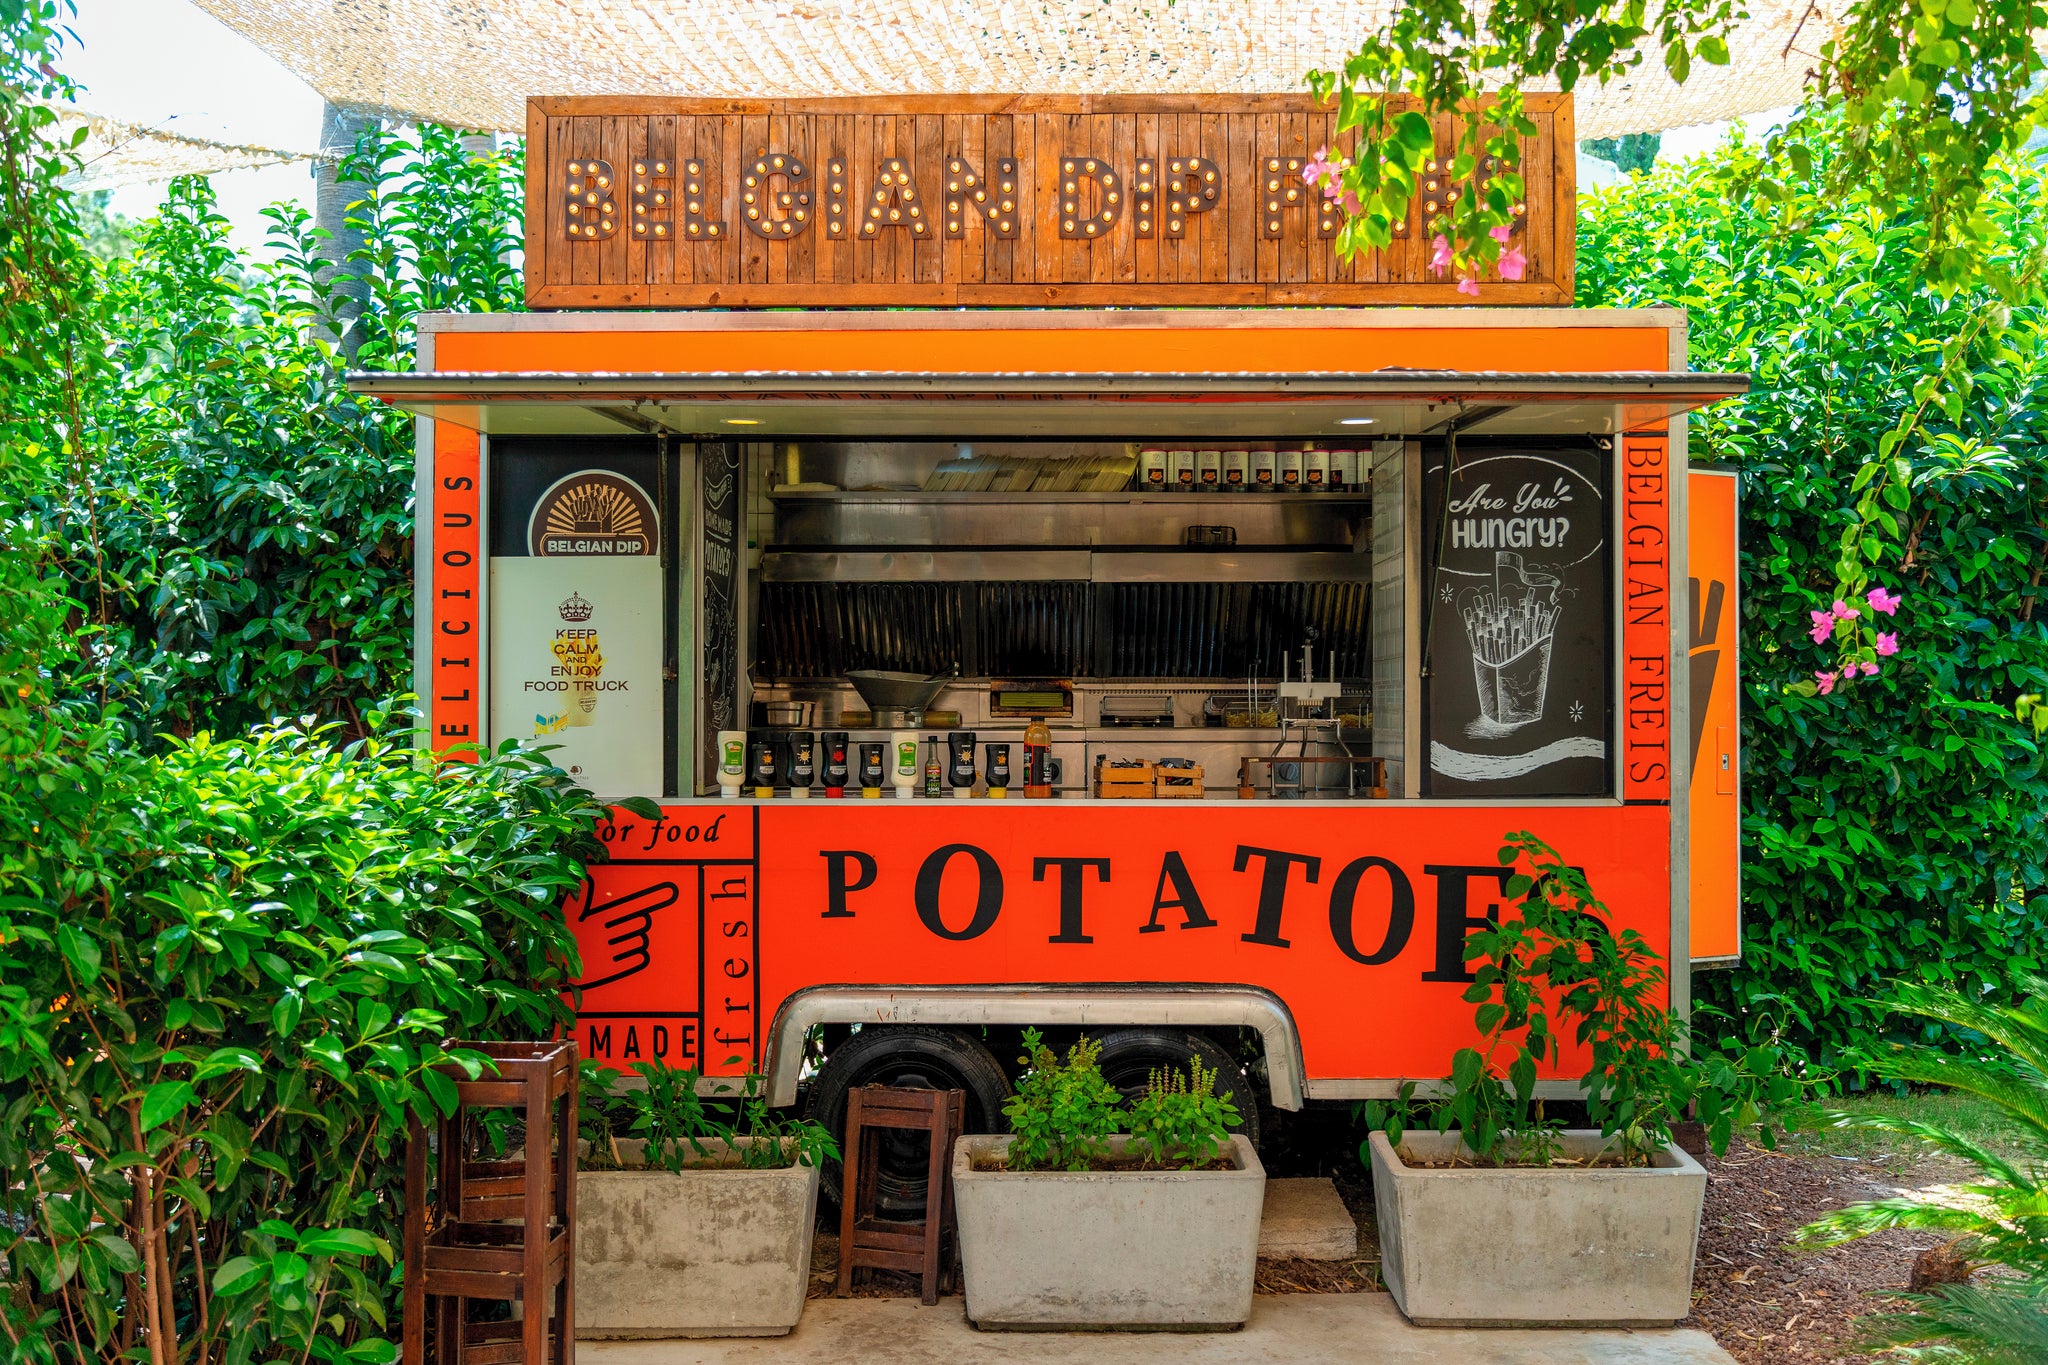 At Antalya’s Doubletree by Hilton Kemer hotel you can sample delicious street food on-site